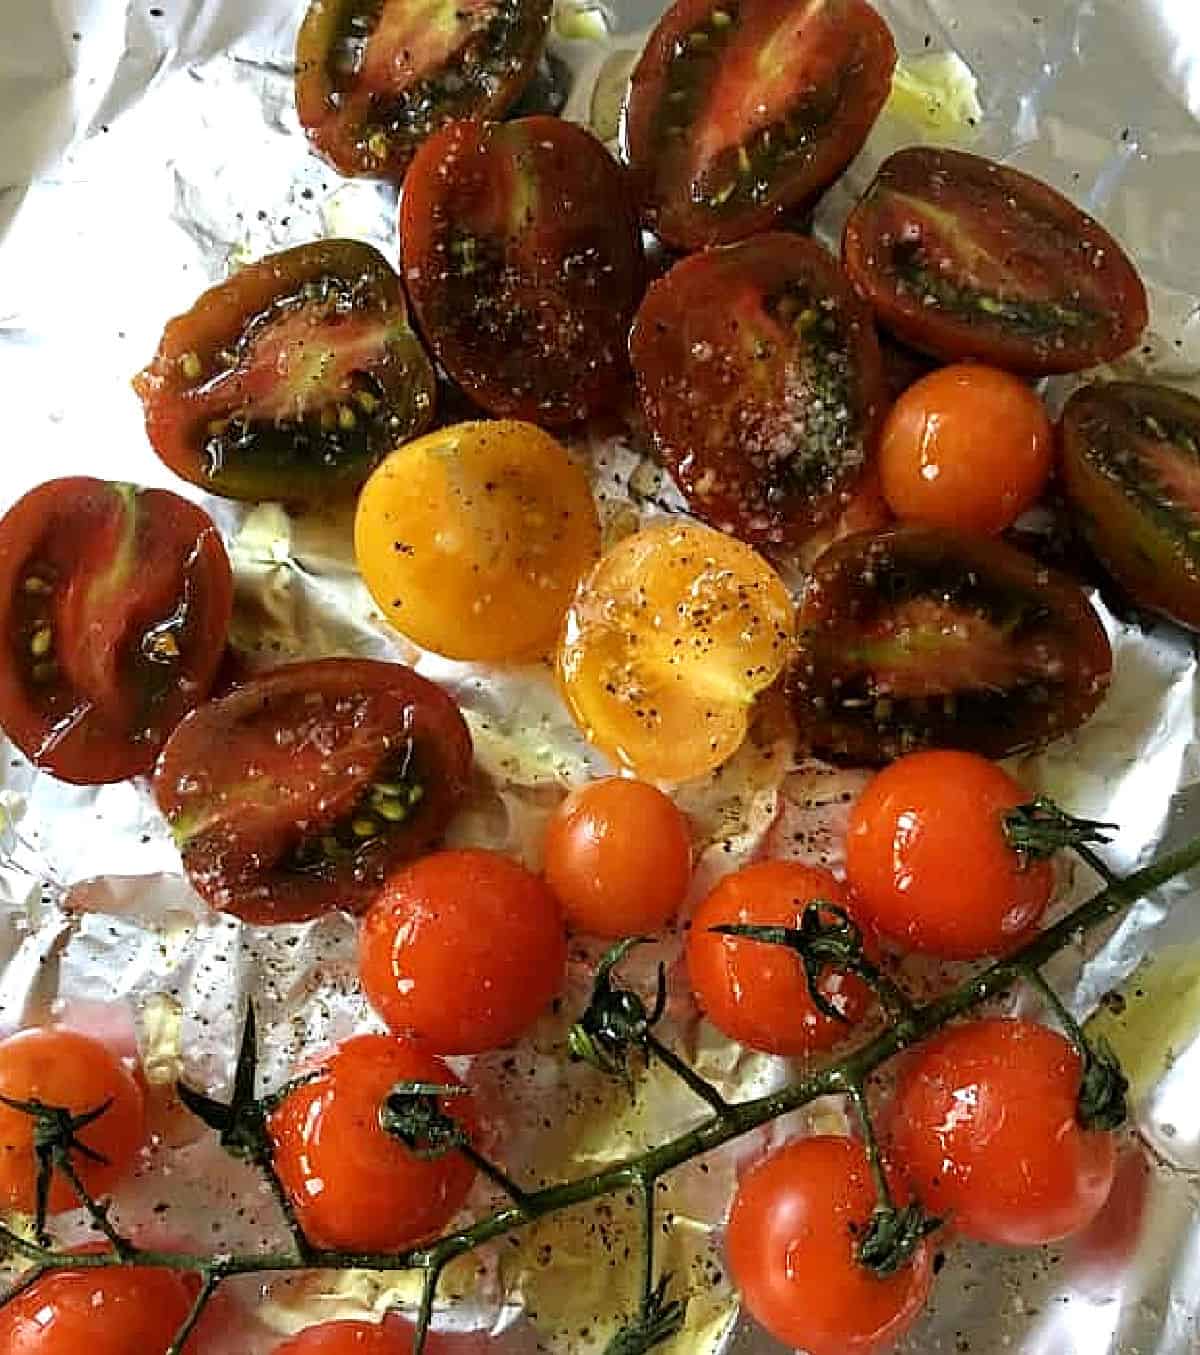 Halved and whole different colored cherry tomatoes on aluminum paper.